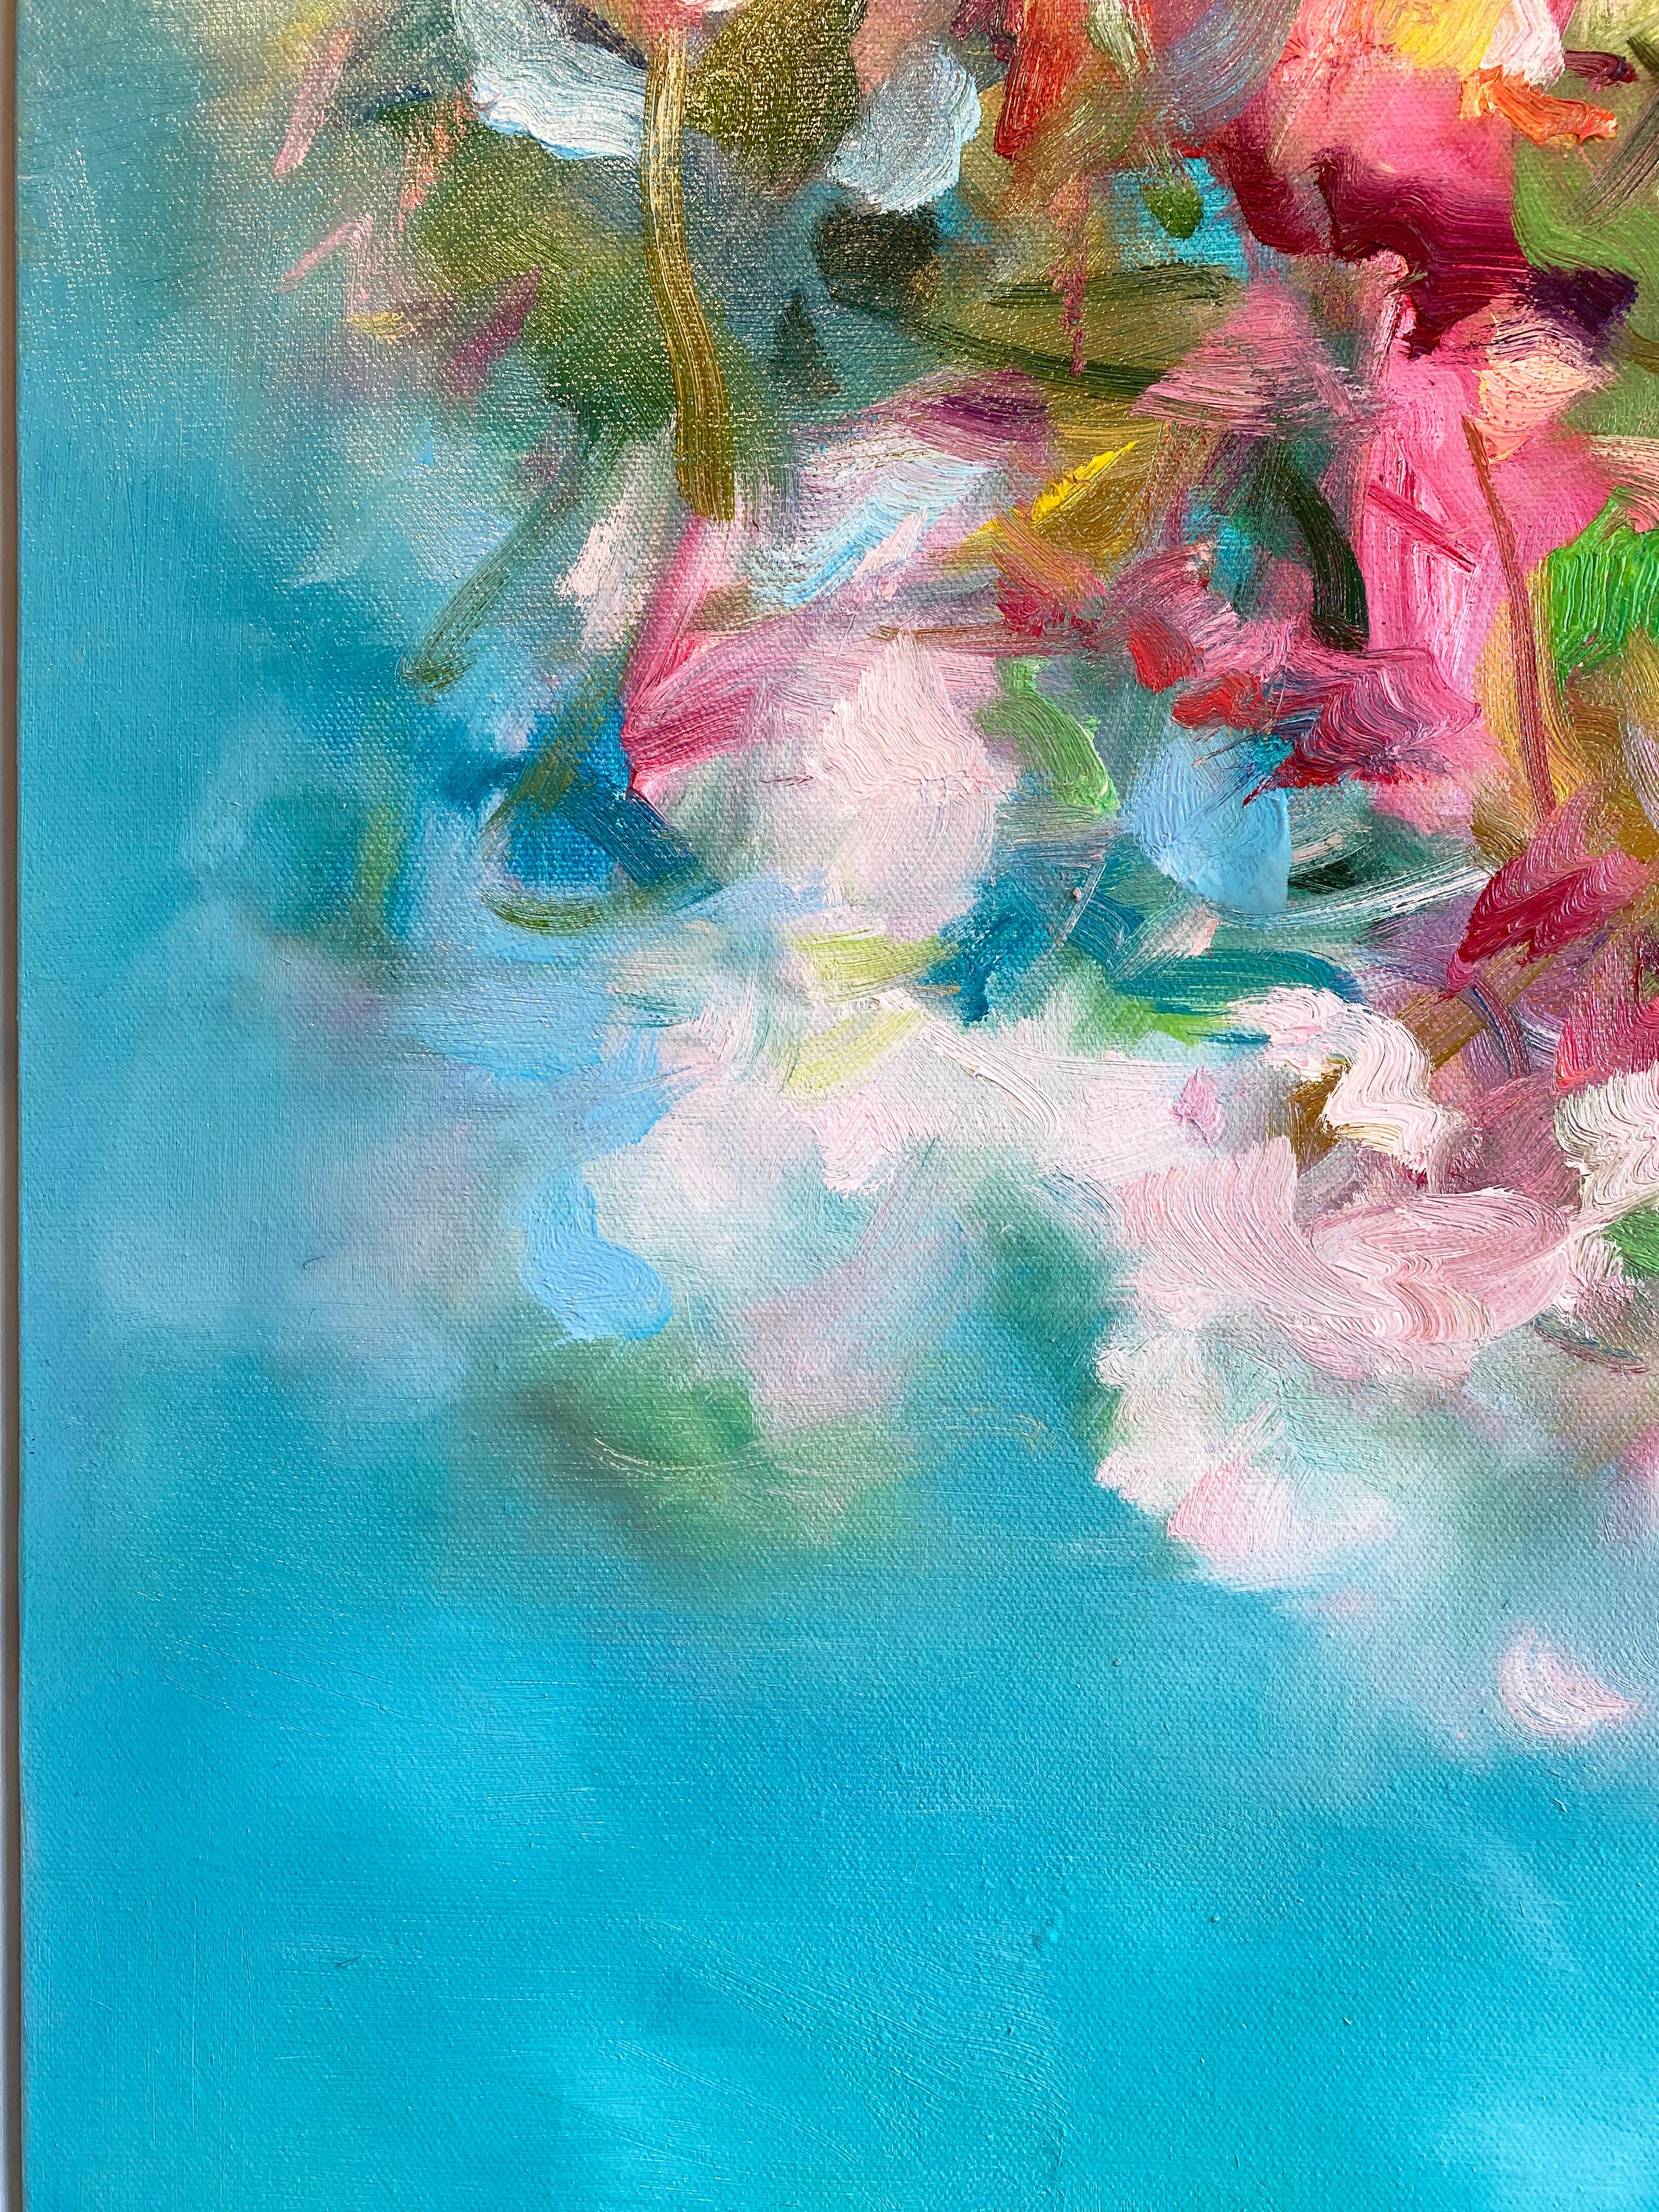 Abstract Expressionist Painting by Yangyang Pan 'Blooming Waterside' 8